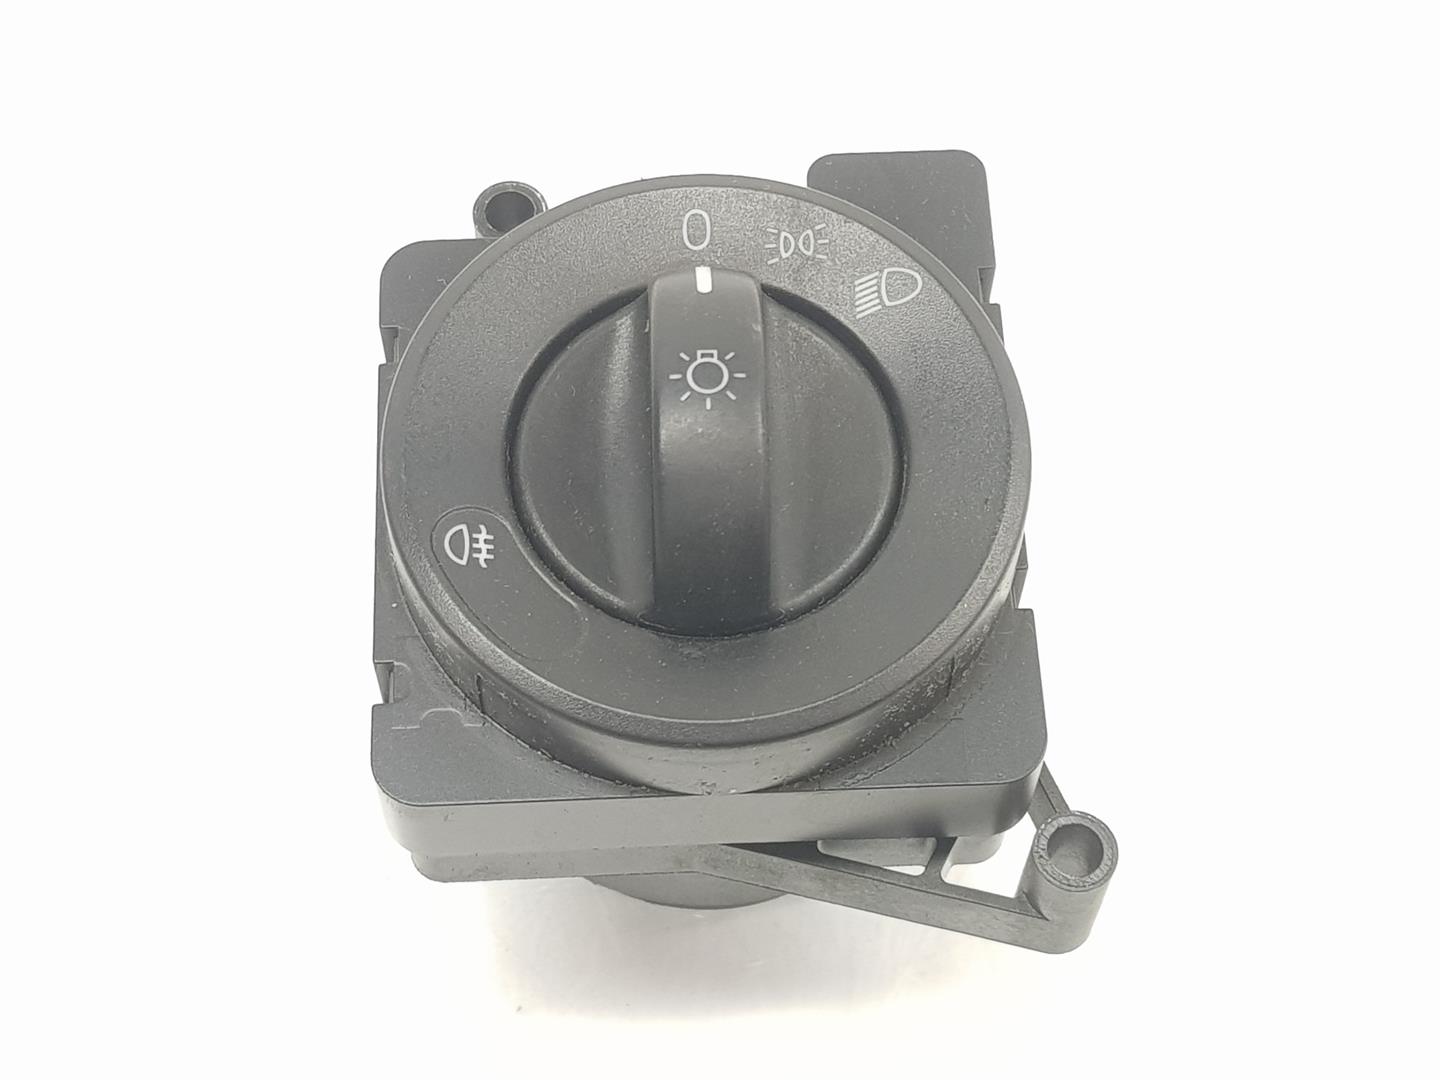 VOLKSWAGEN Crafter 1 generation (2006-2016) Headlight Switch Control Unit 2E0959561K, A9065450104 21335379